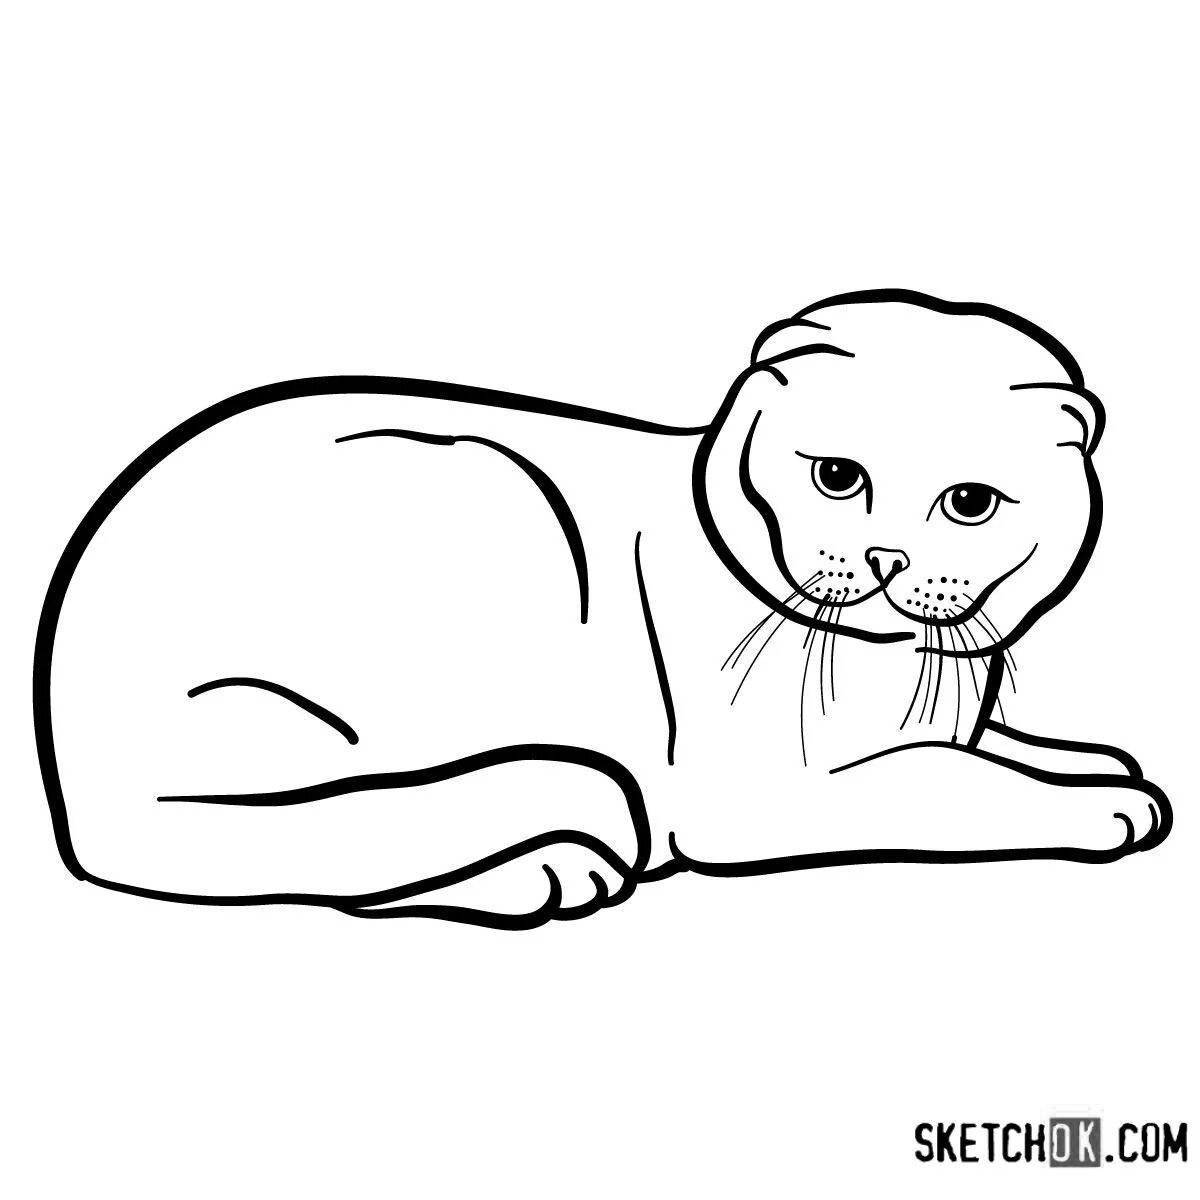 Animated british cat coloring page